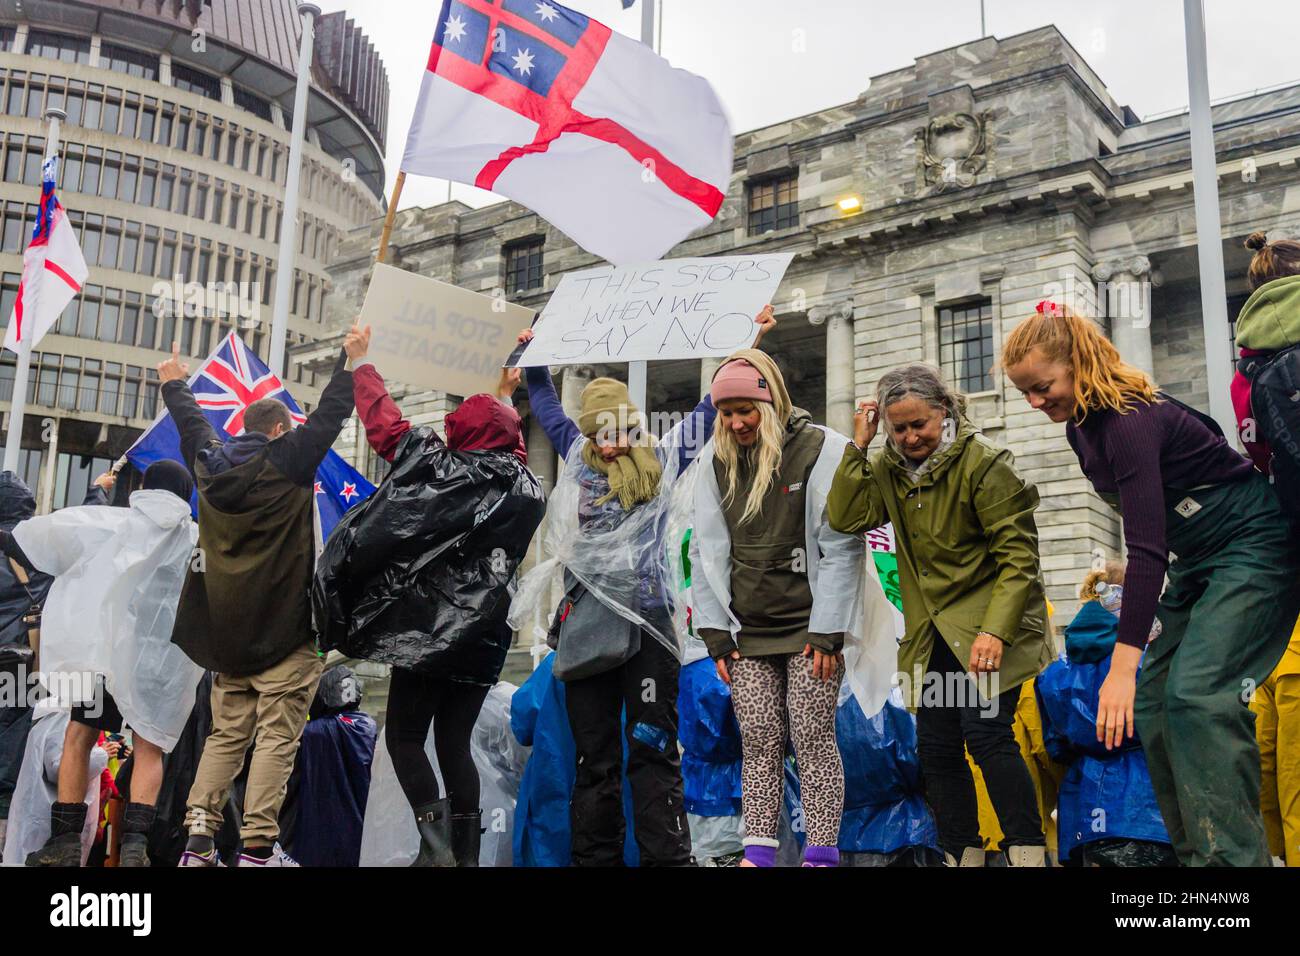 Wellington, New Zealand. February 13, 2022: Protestors at Parliament gathered in large numbers demanding that Covid mandates be dropped. Stock Photo